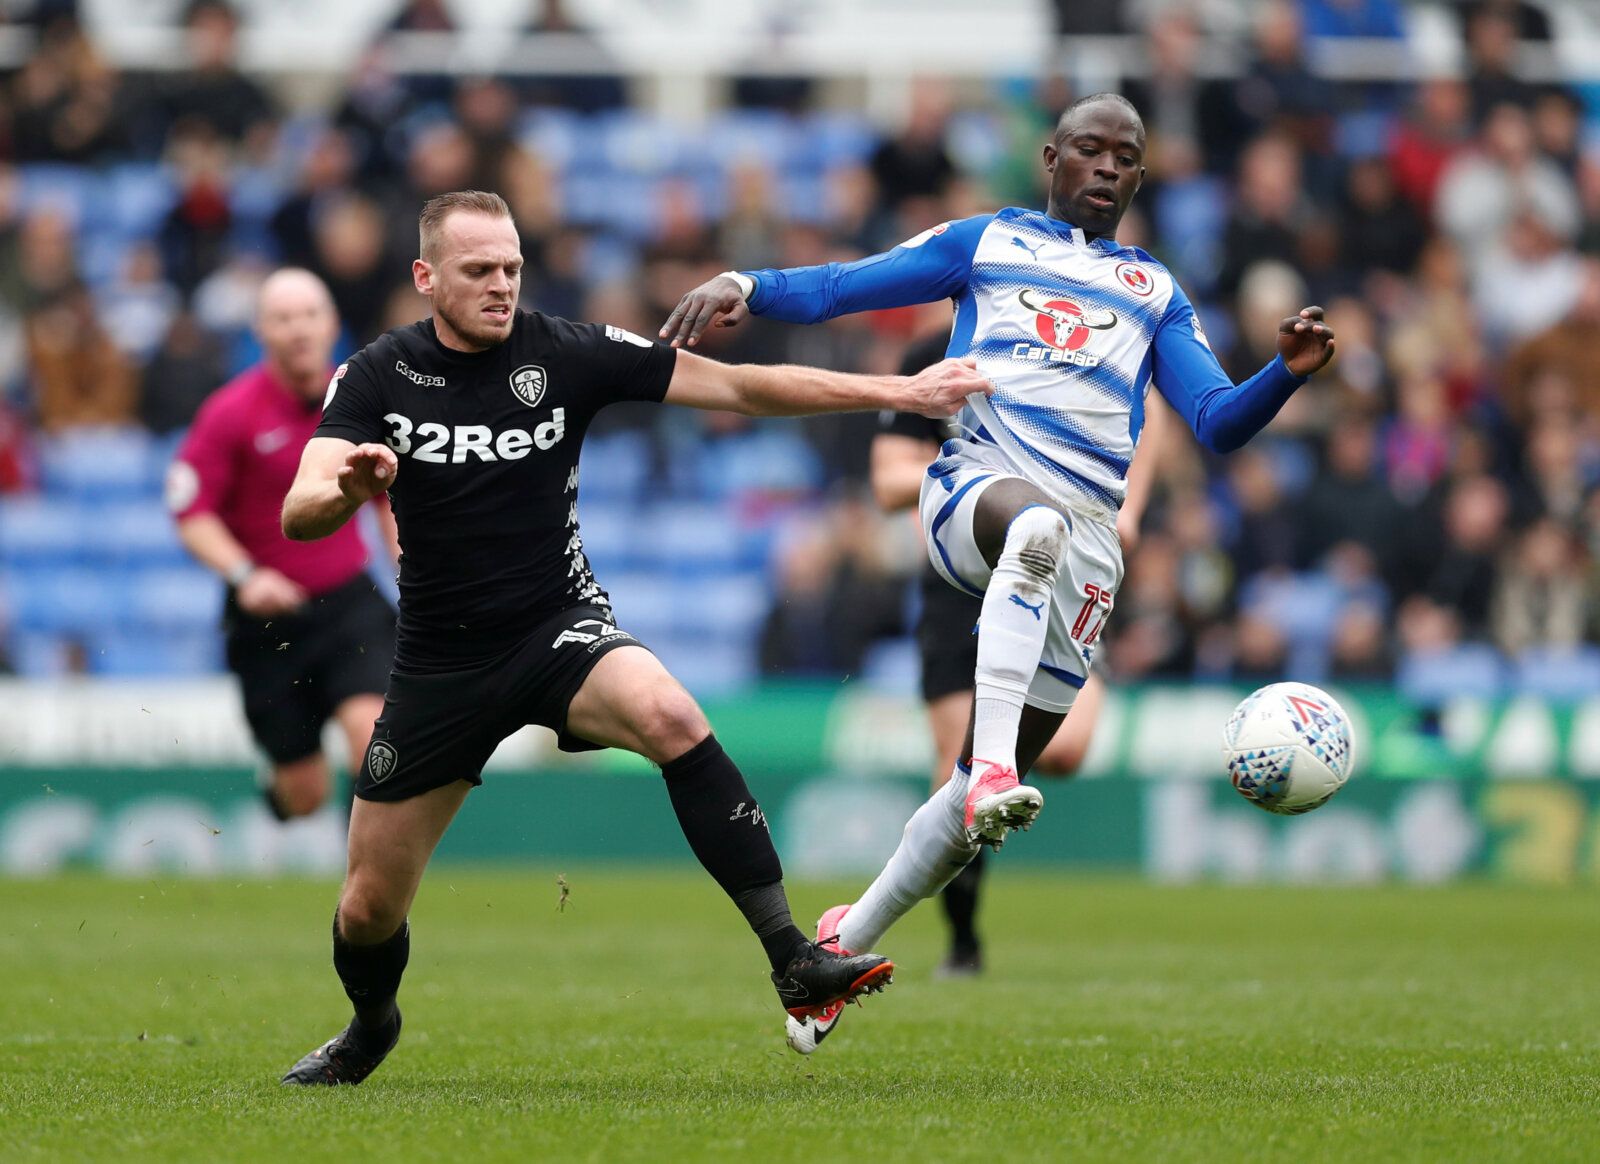 Soccer Football - Championship - Reading vs Leeds United - Madejski Stadium, Reading, Britain - March 10, 2018   Reading's Modou Barrow in action with Leeds United's Laurens De Bock   Action Images/Matthew Childs    EDITORIAL USE ONLY. No use with unauthorized audio, video, data, fixture lists, club/league logos or 